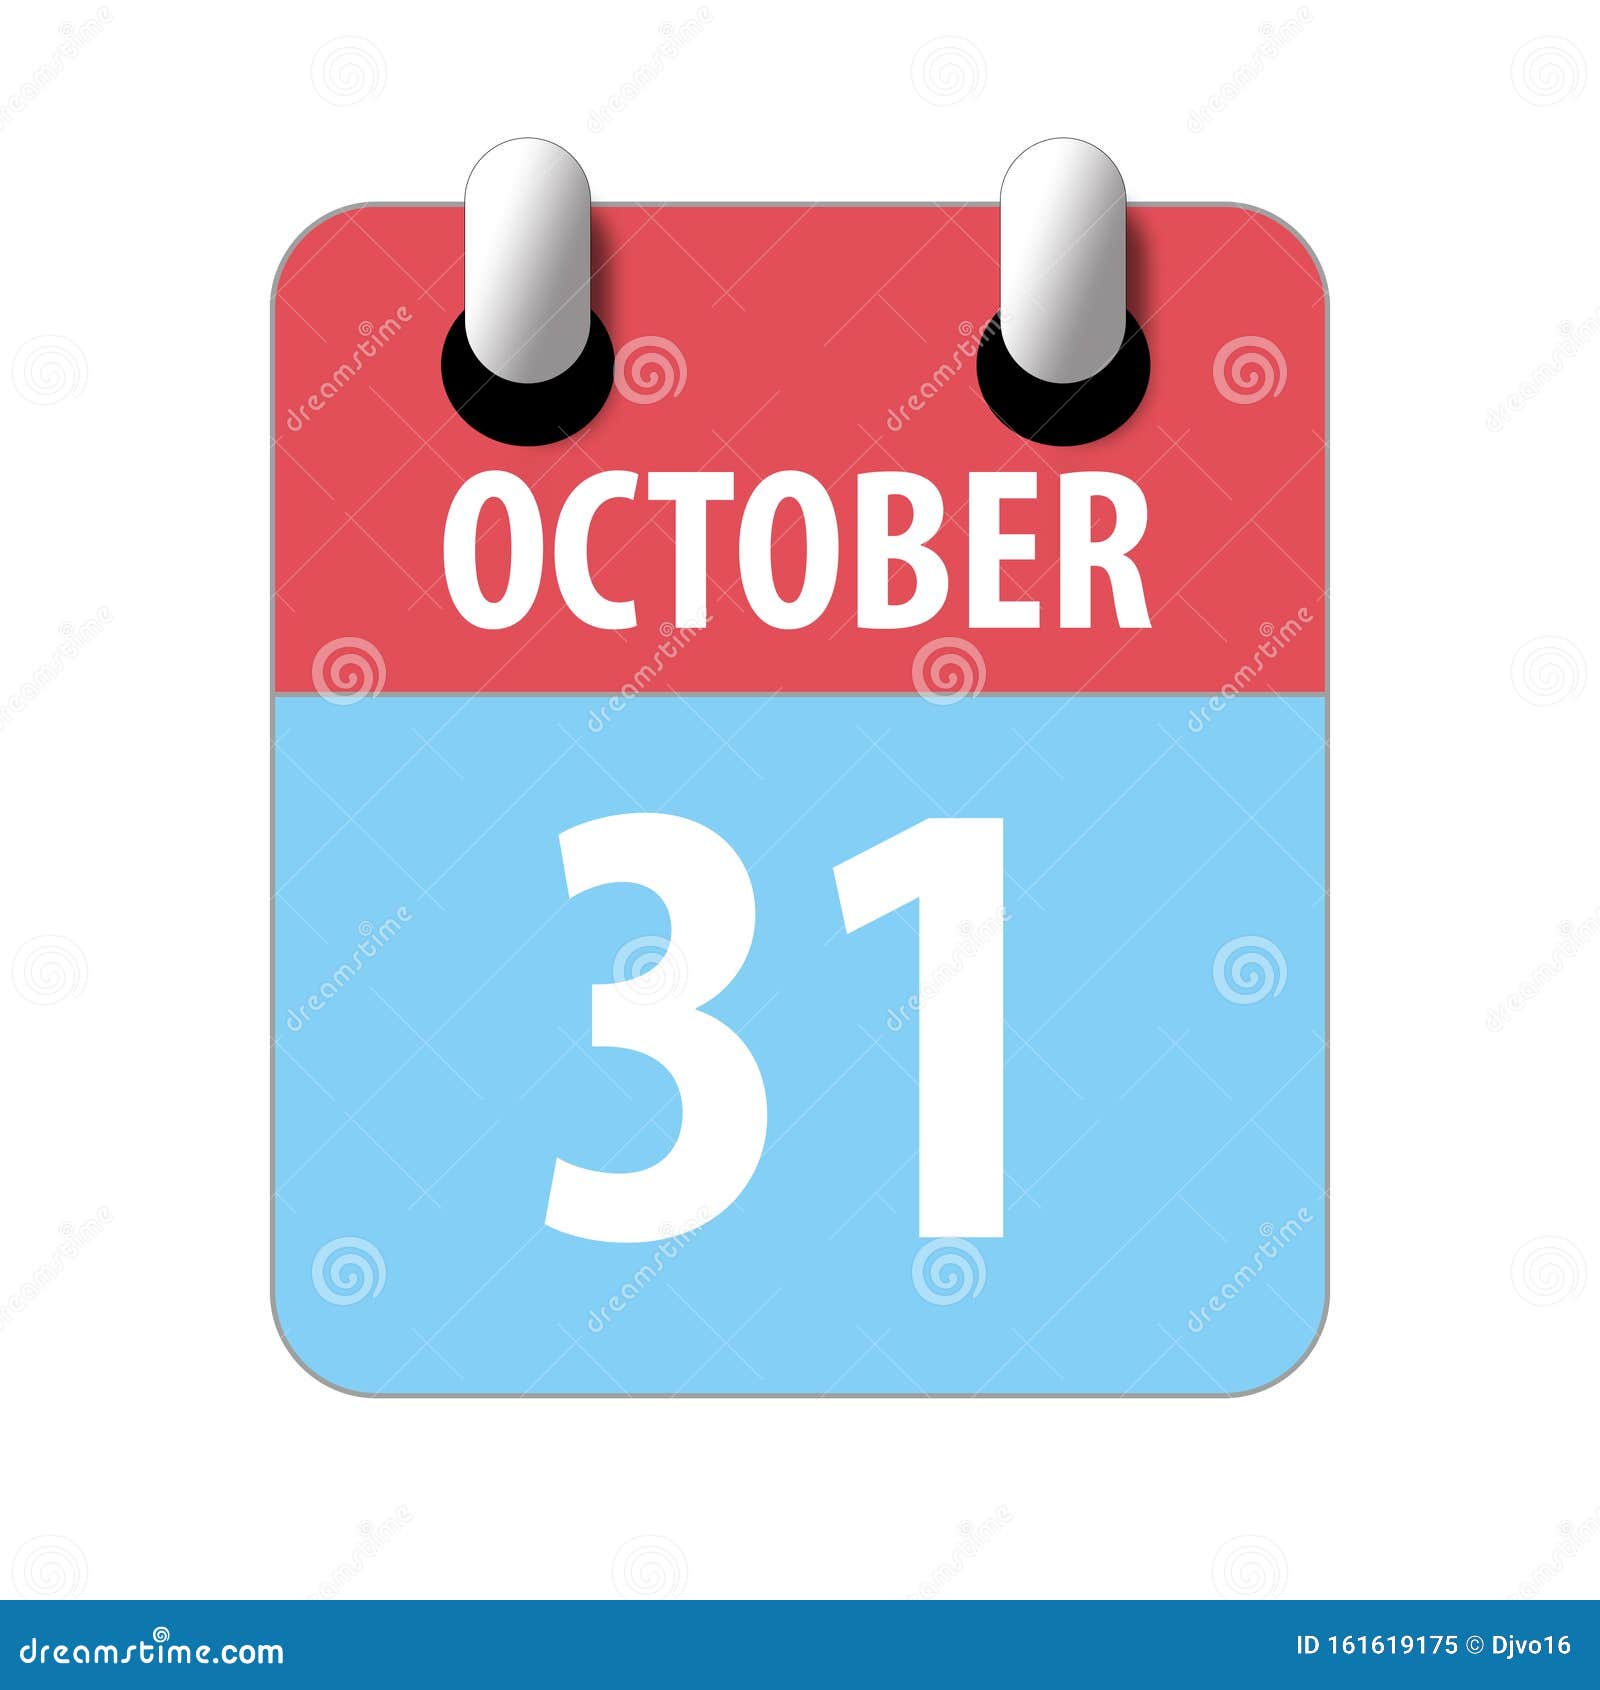 Top 98+ Images what day is the 31st of october Sharp